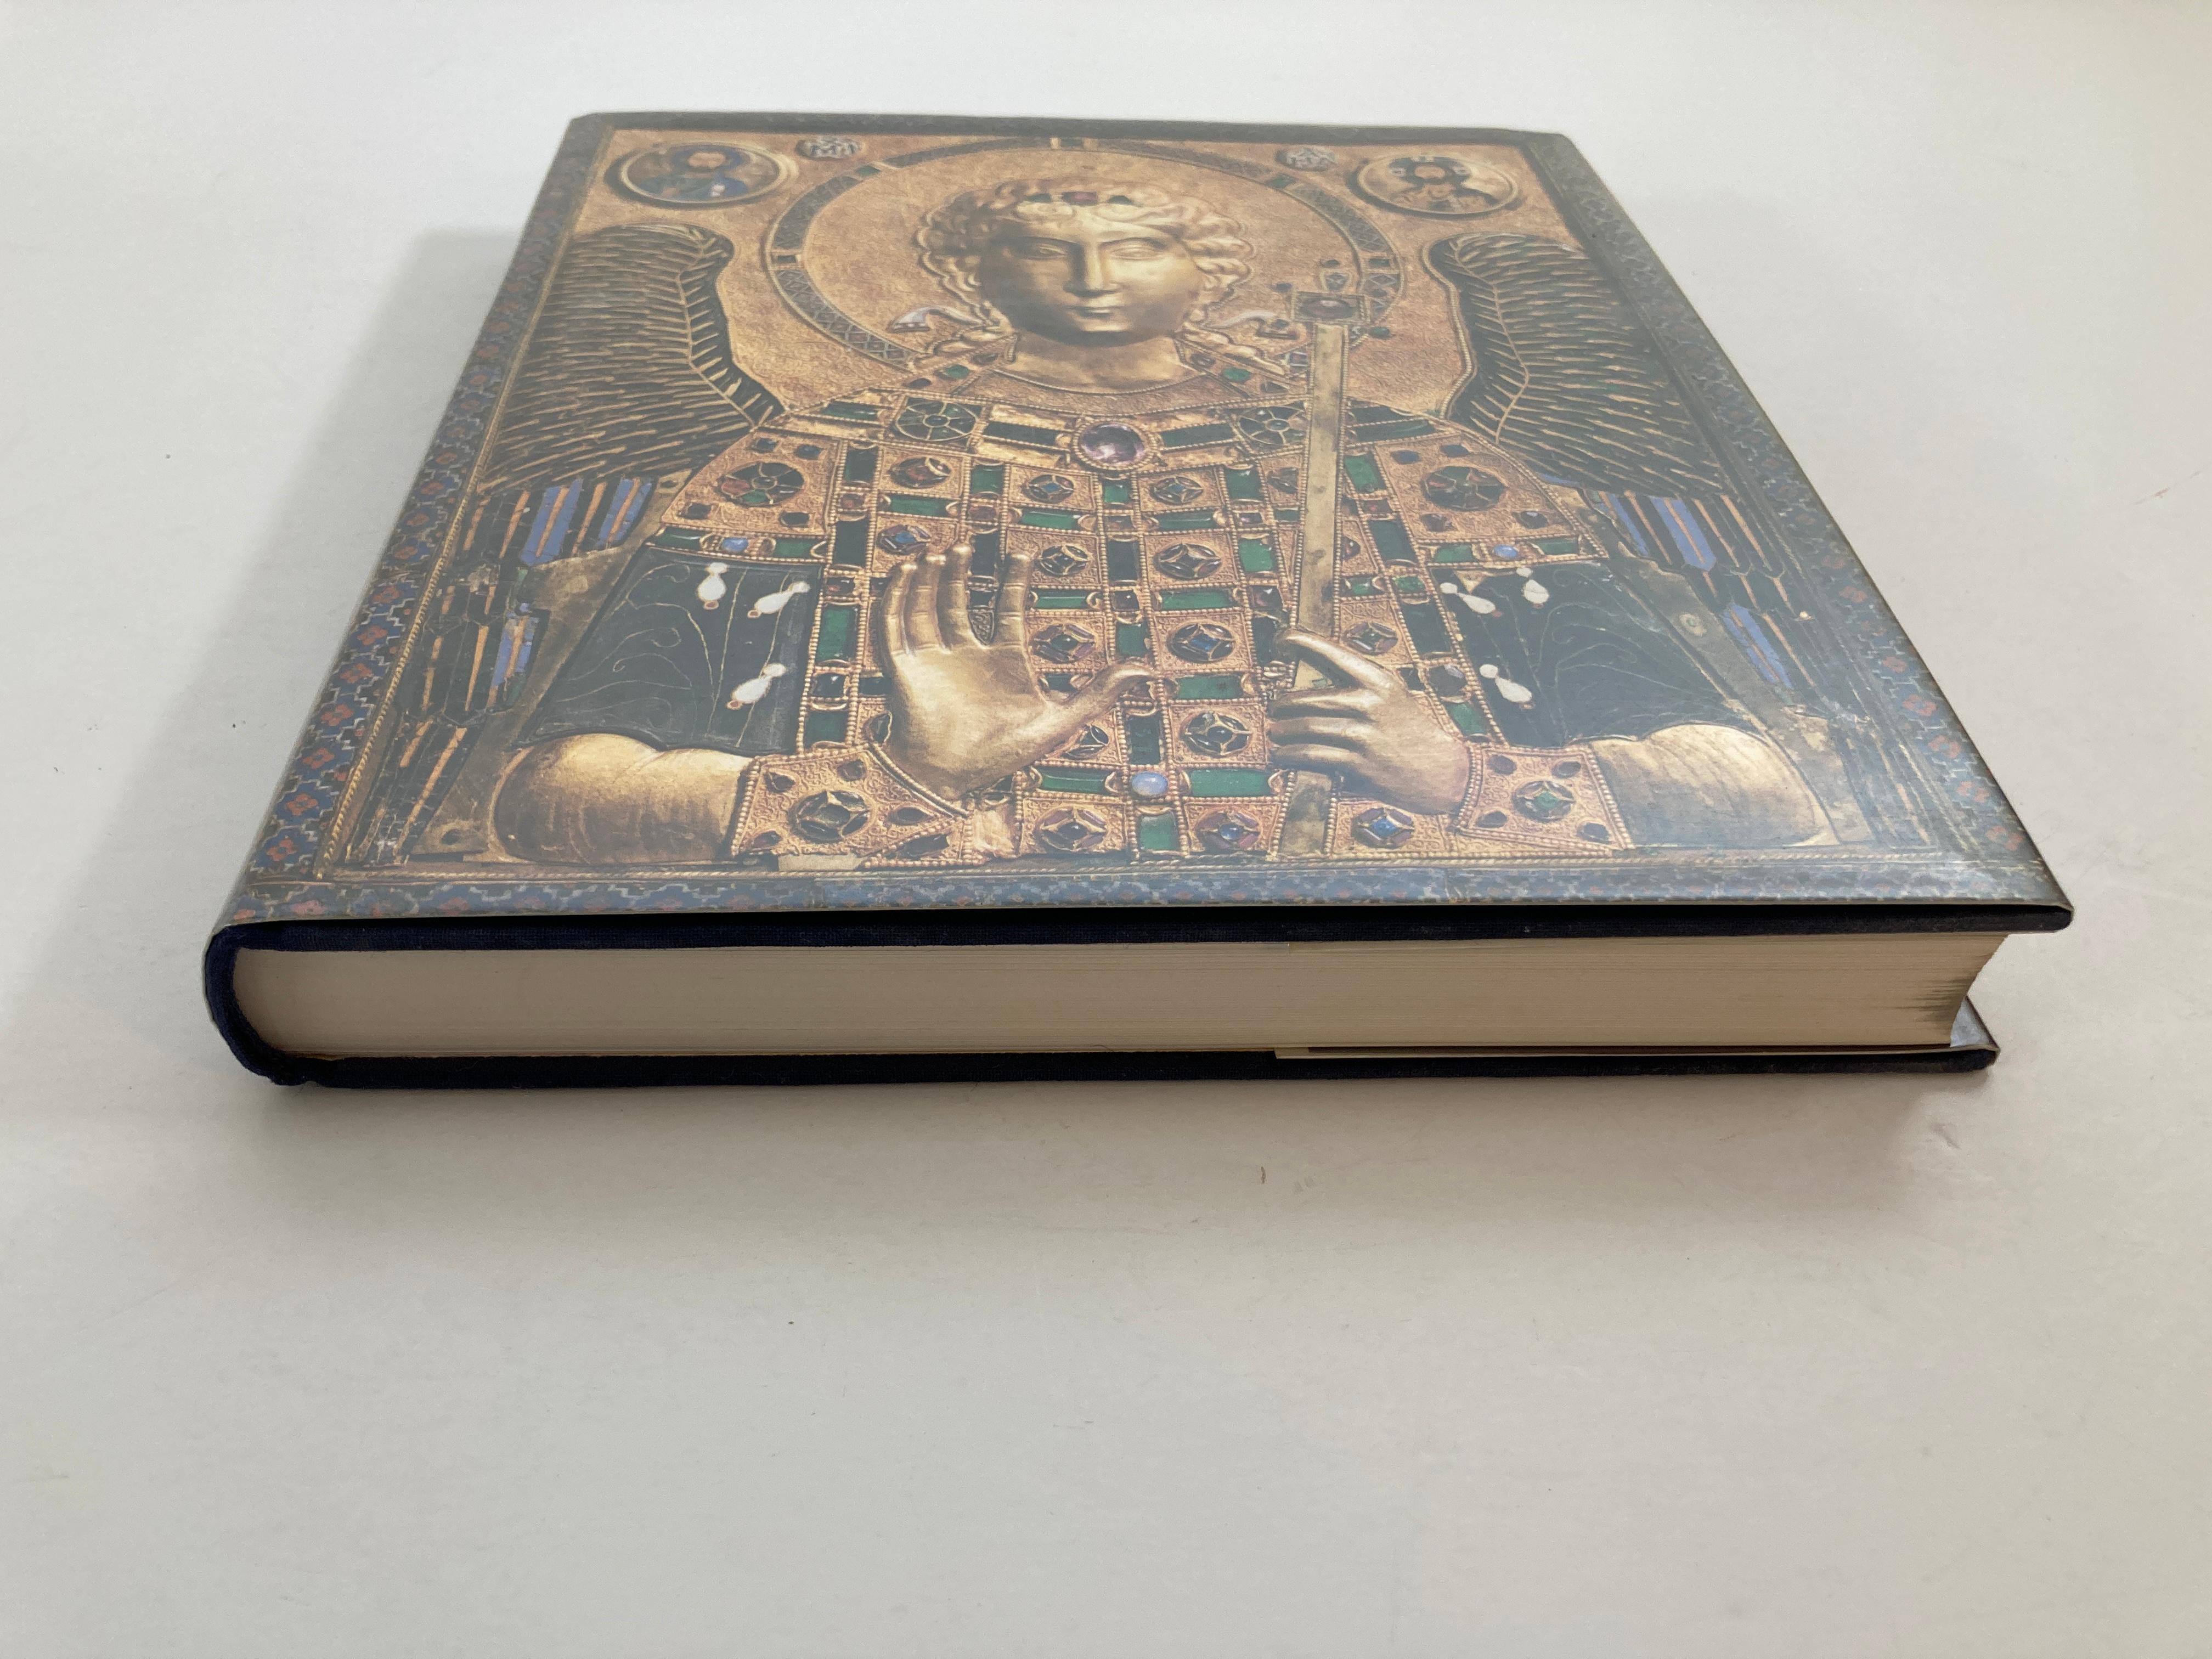 Country The Treasury of San Marco, Venice First Edition by David Buckton Hardcover Book For Sale